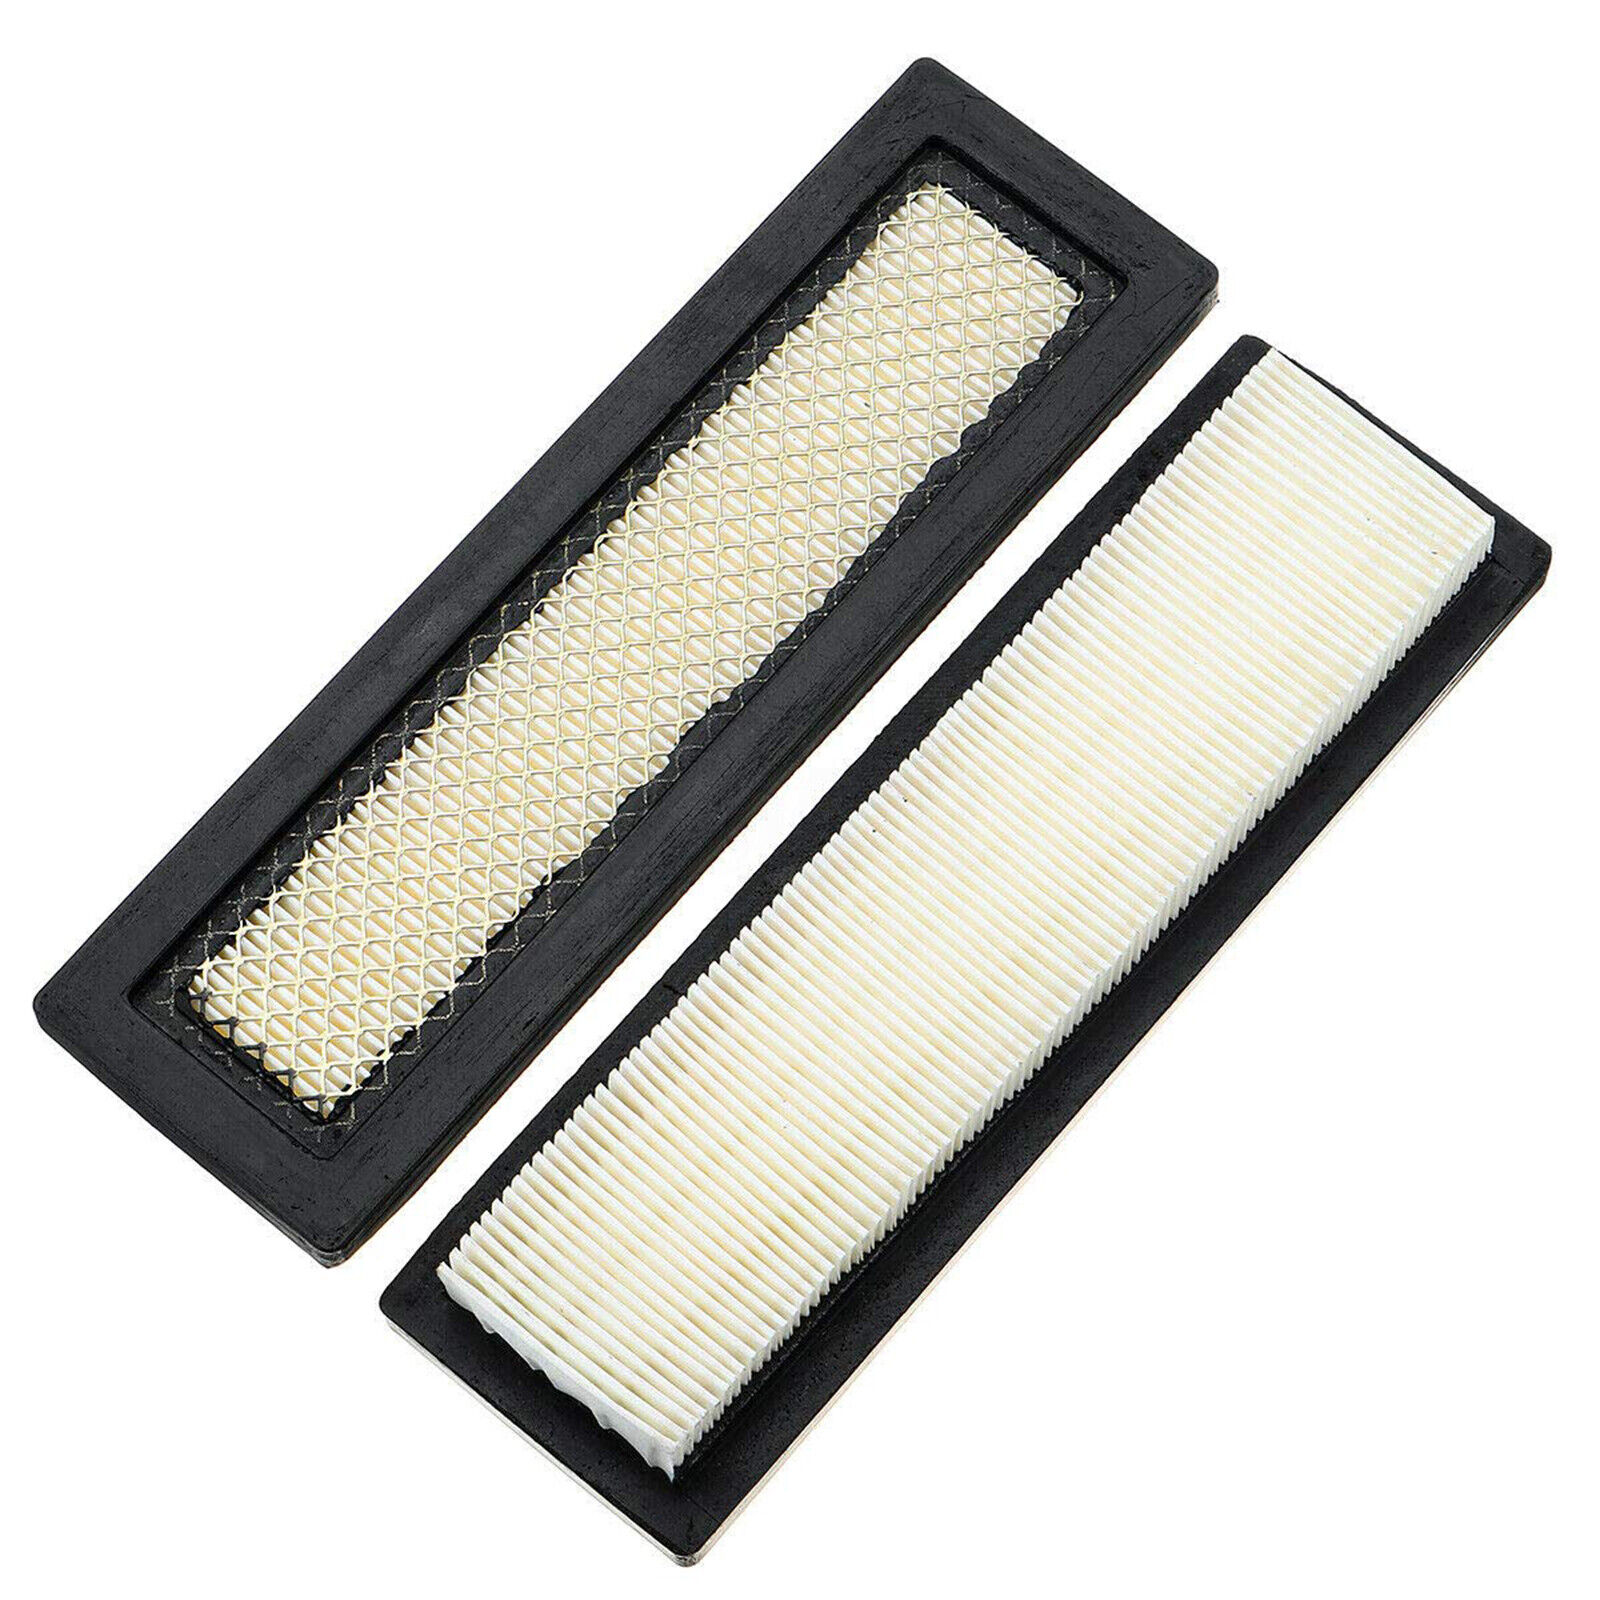 2X Air Filter 7176099 for Bobcat A770 S530 S550 S570 S590 S630 S650 S740 S850